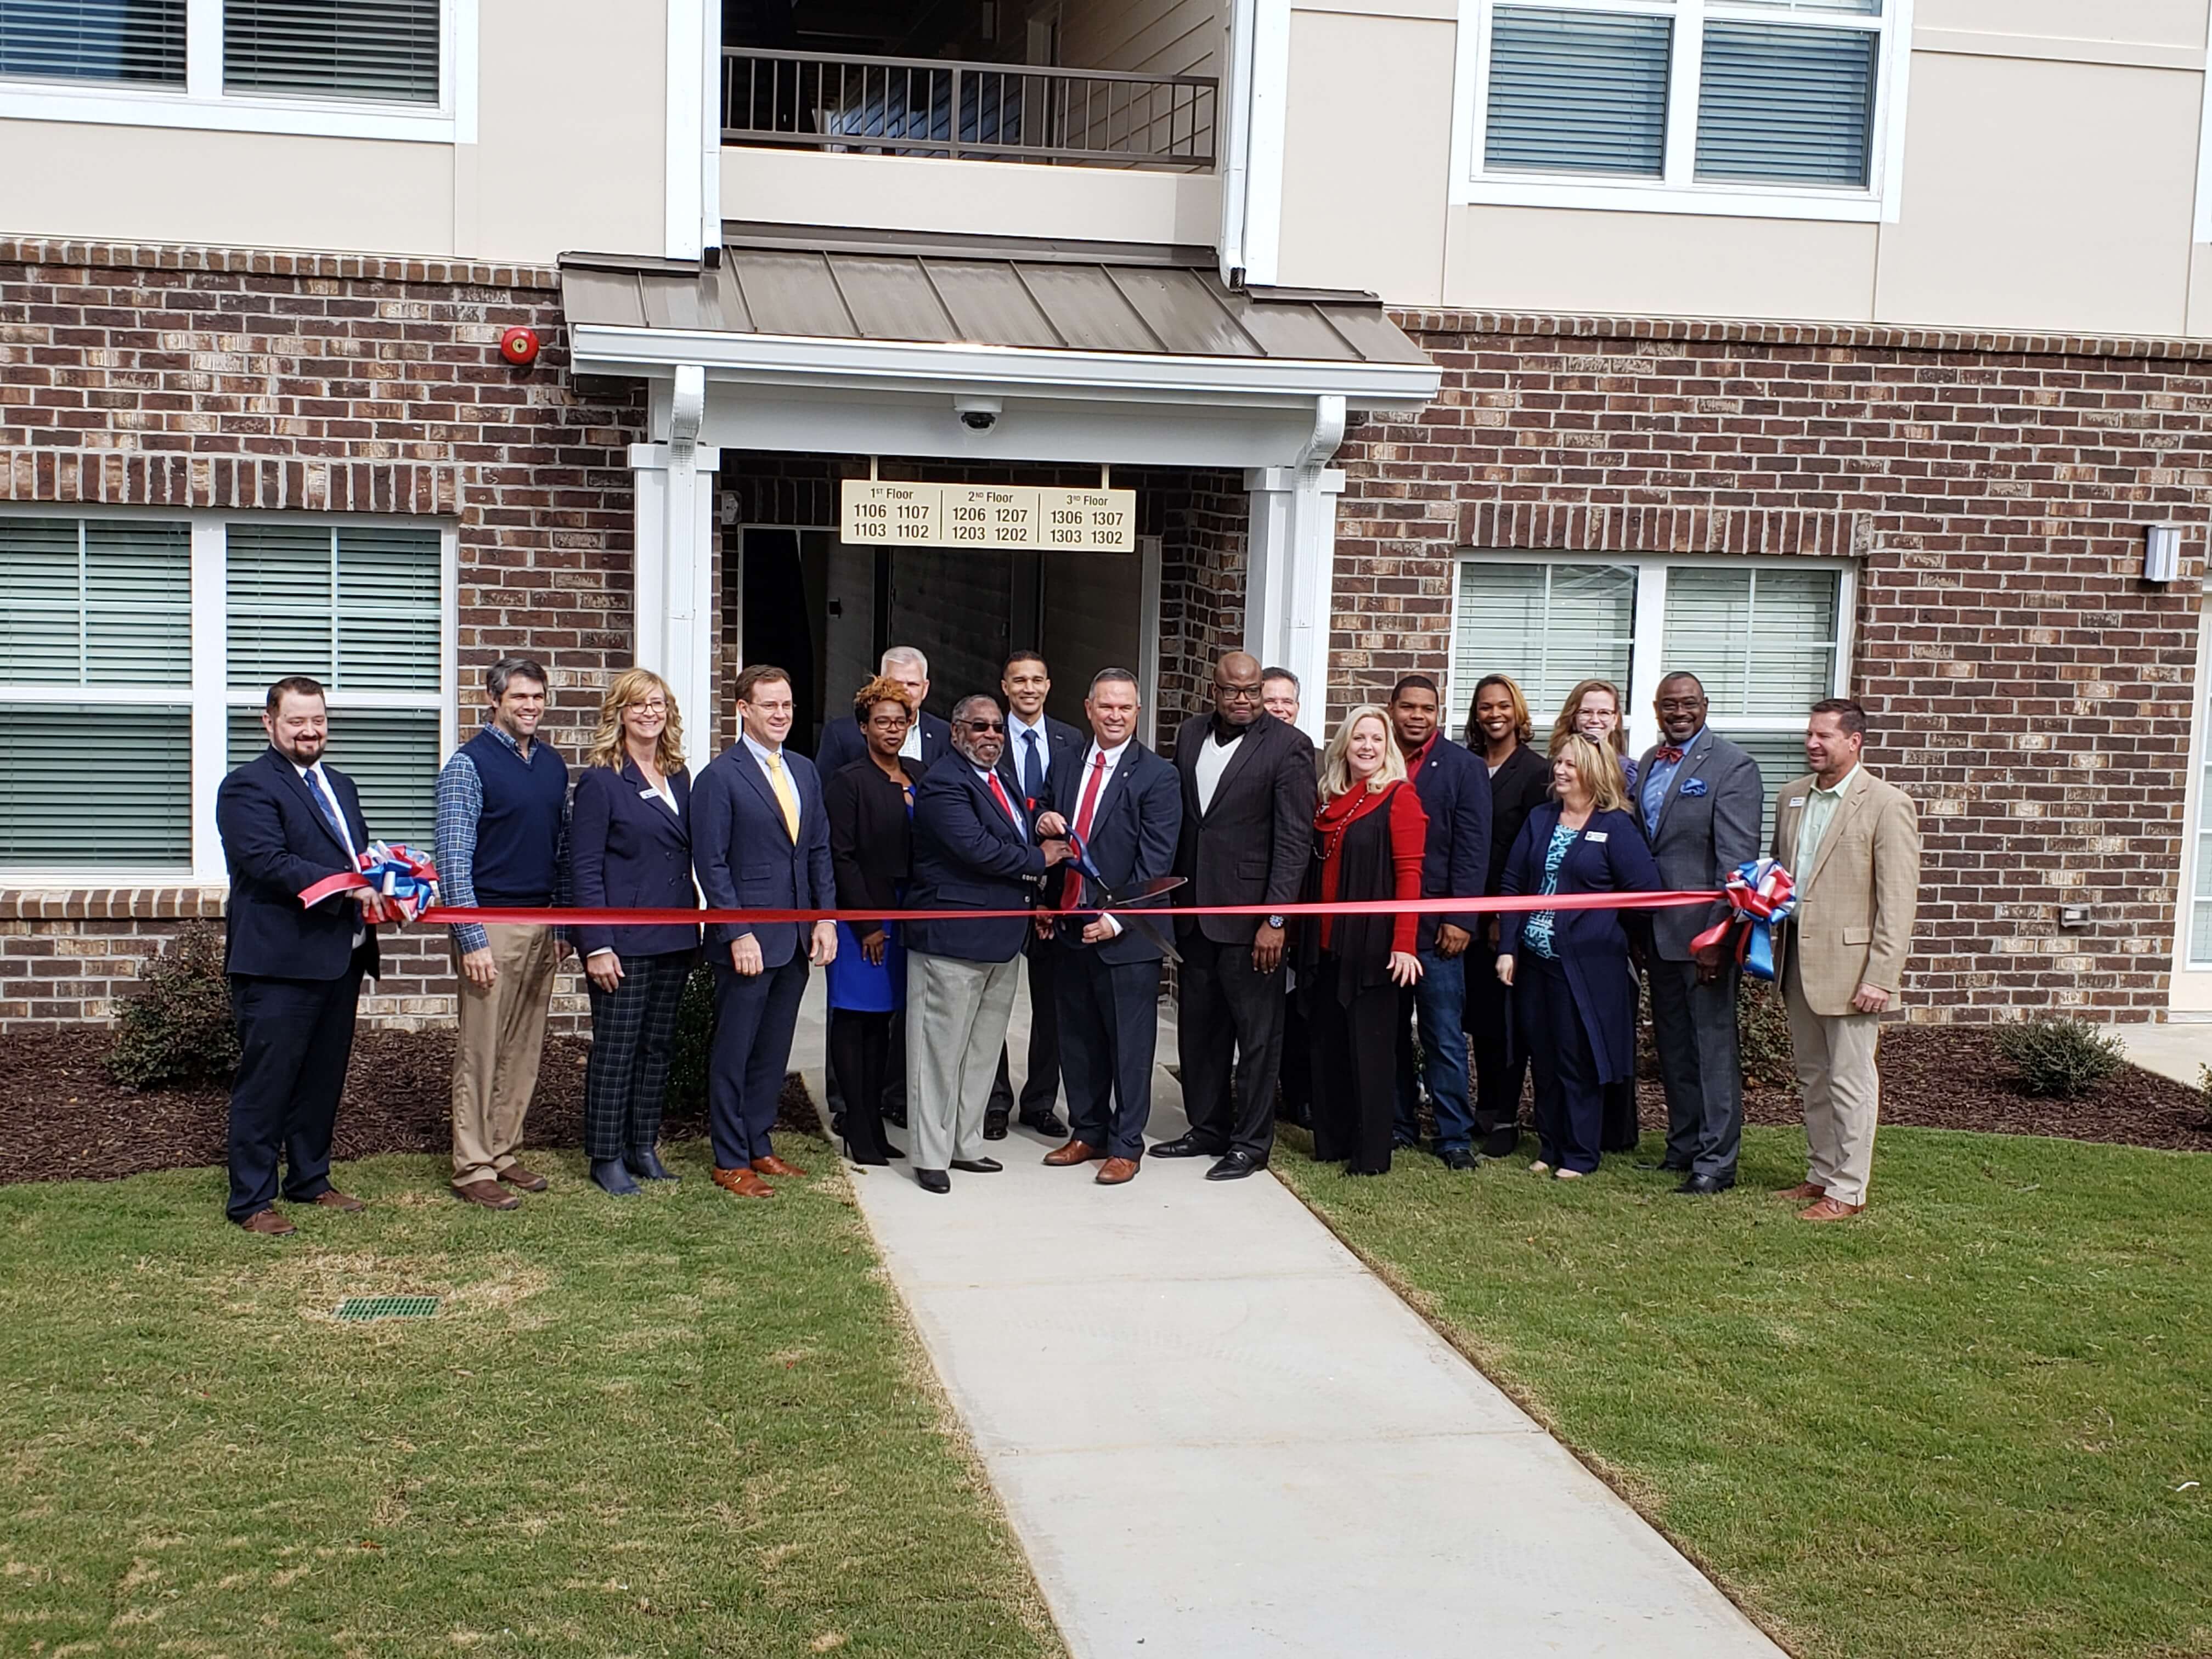 Officials cut the ribbon on a mixed-income community in Georgia.